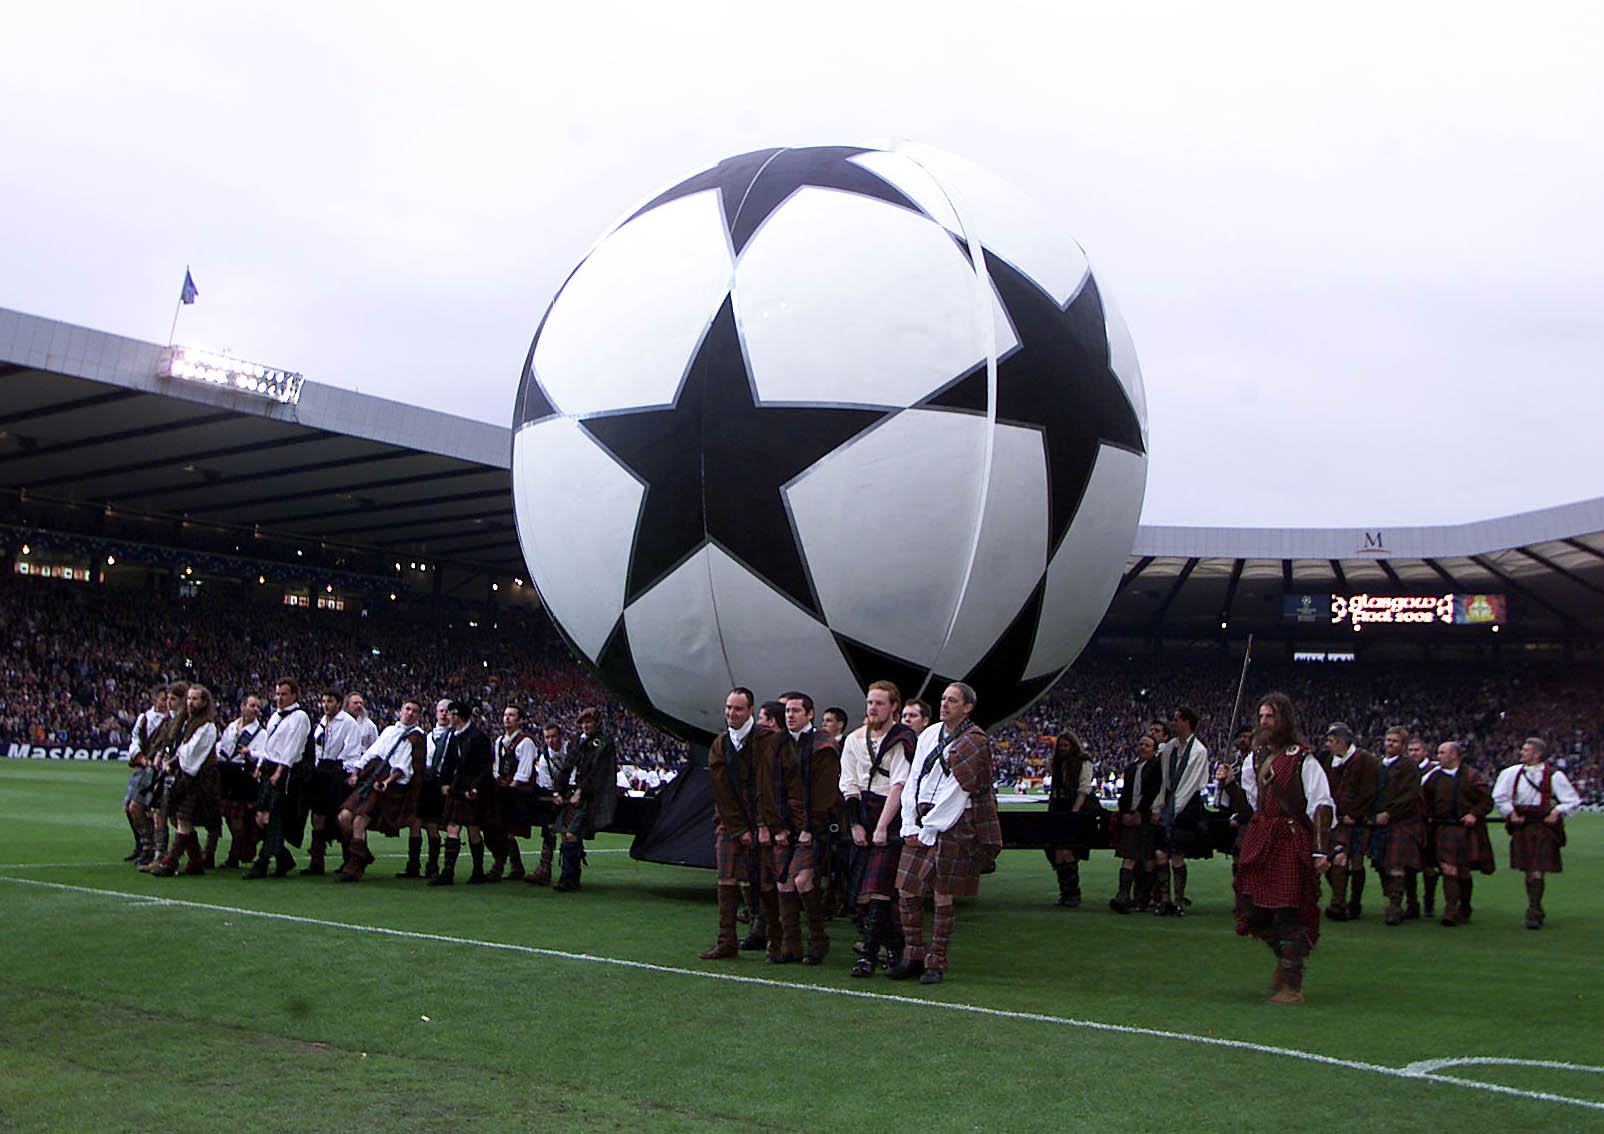 A giant Champions League ball on the Hampden pitch before kick-off.